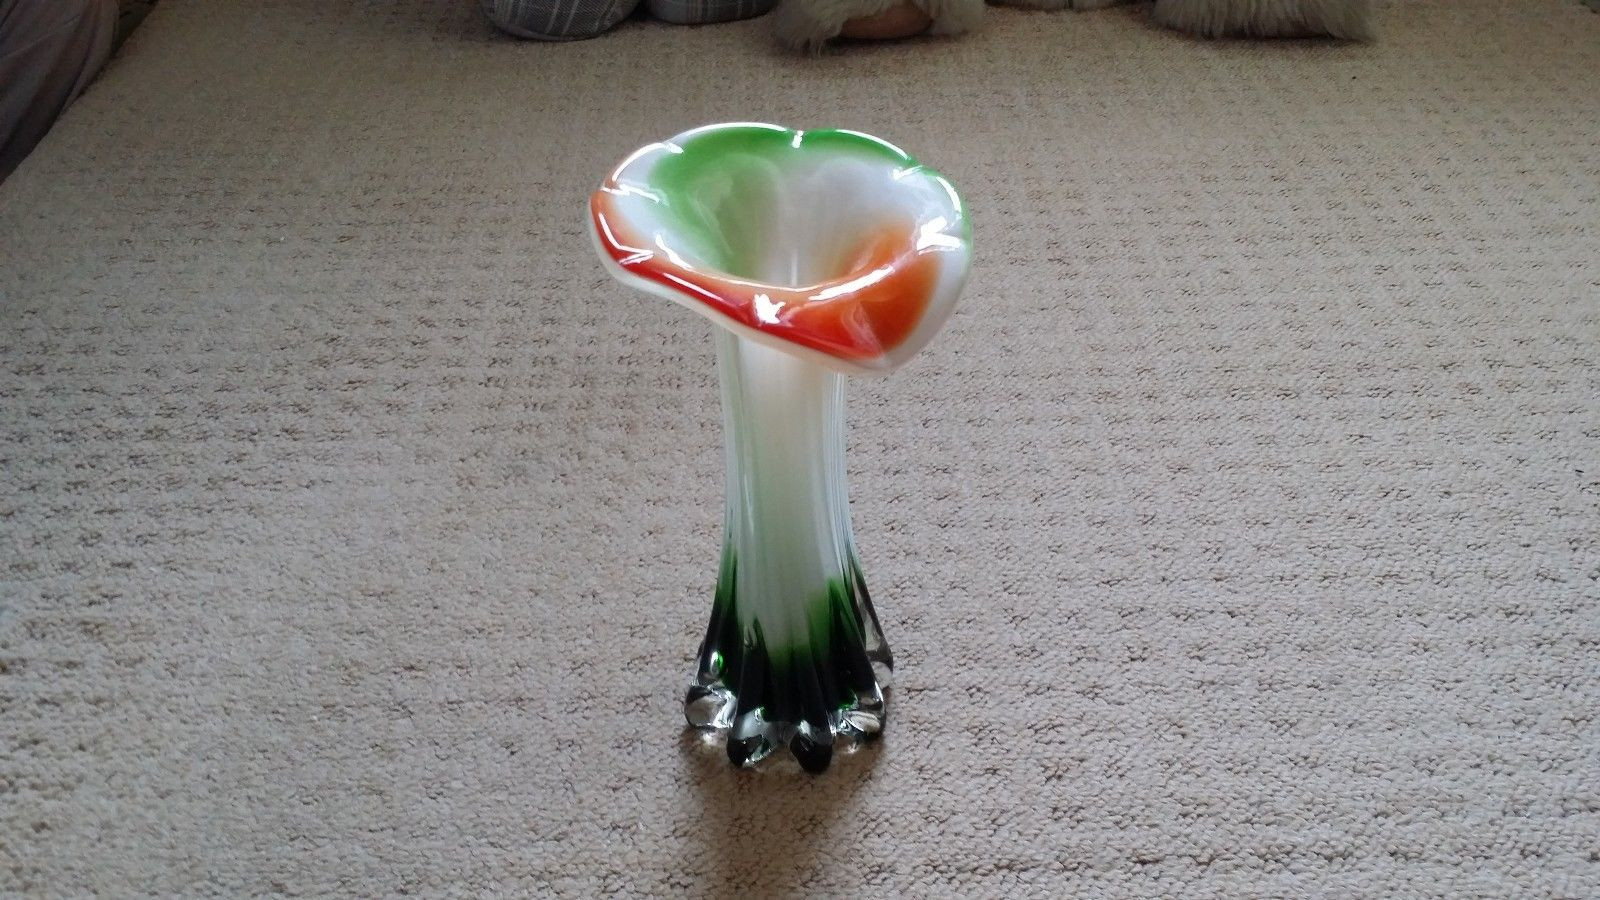 murano tulip vase of murano glass vase green white red jack in the pulpit lilly in murano glass vase green white red jack in the pulpit 1 of 2 murano glass vase